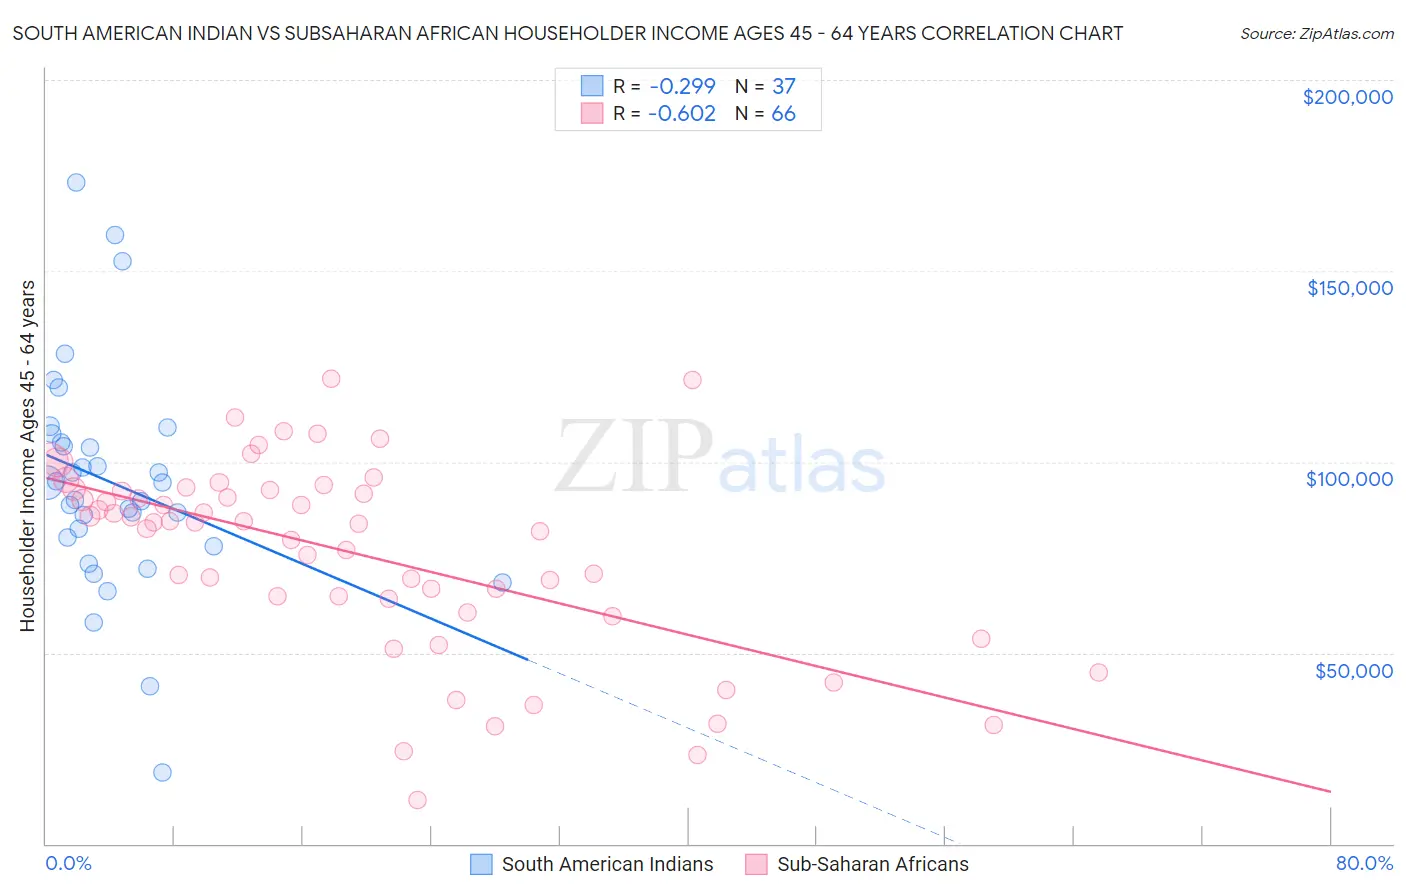 South American Indian vs Subsaharan African Householder Income Ages 45 - 64 years